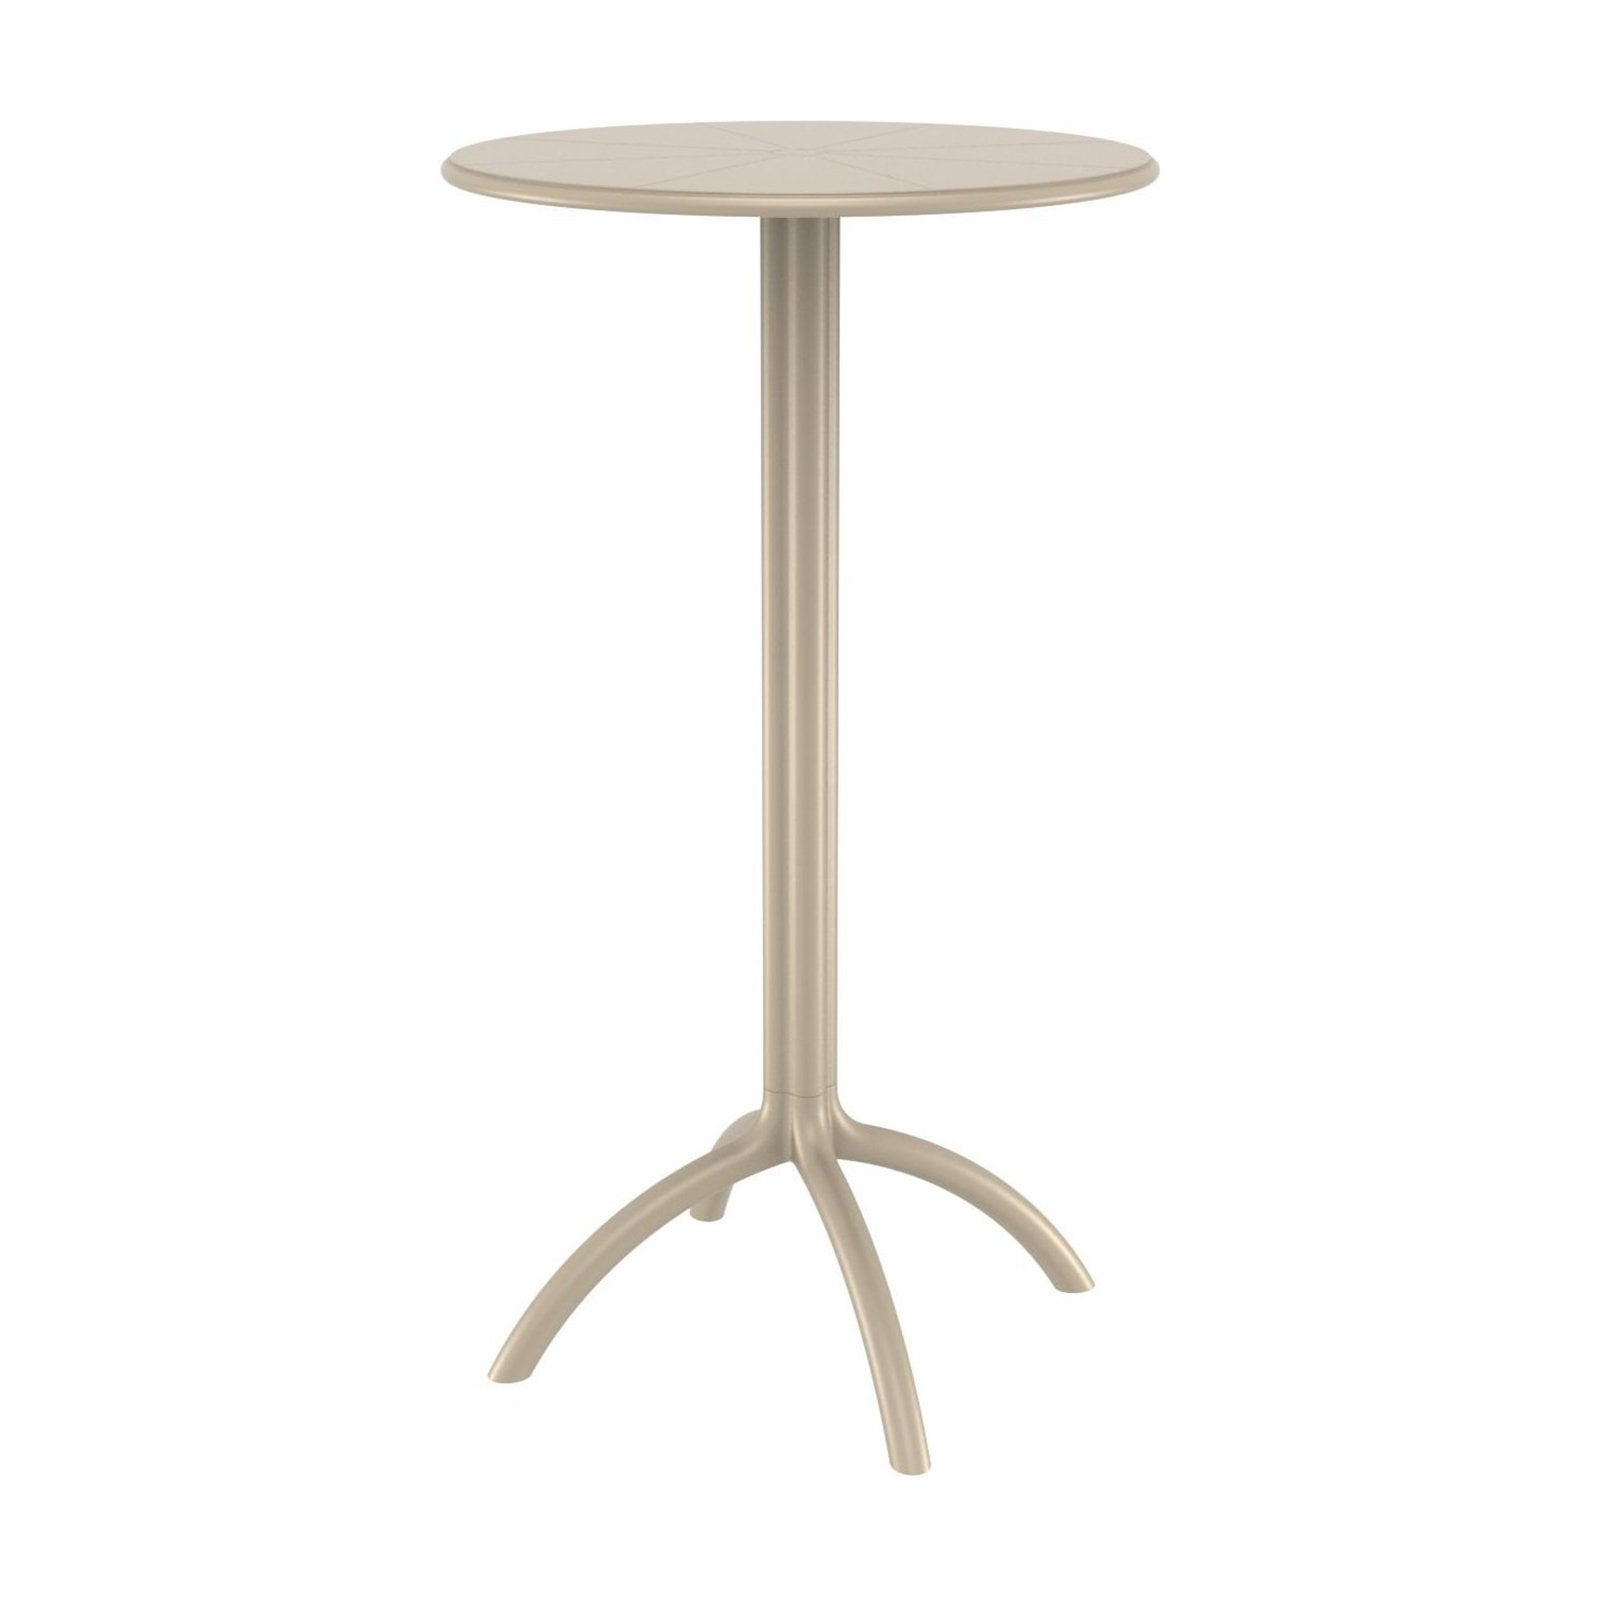 Isp161-dvr Octopus Round Bar Table, Dove Gray